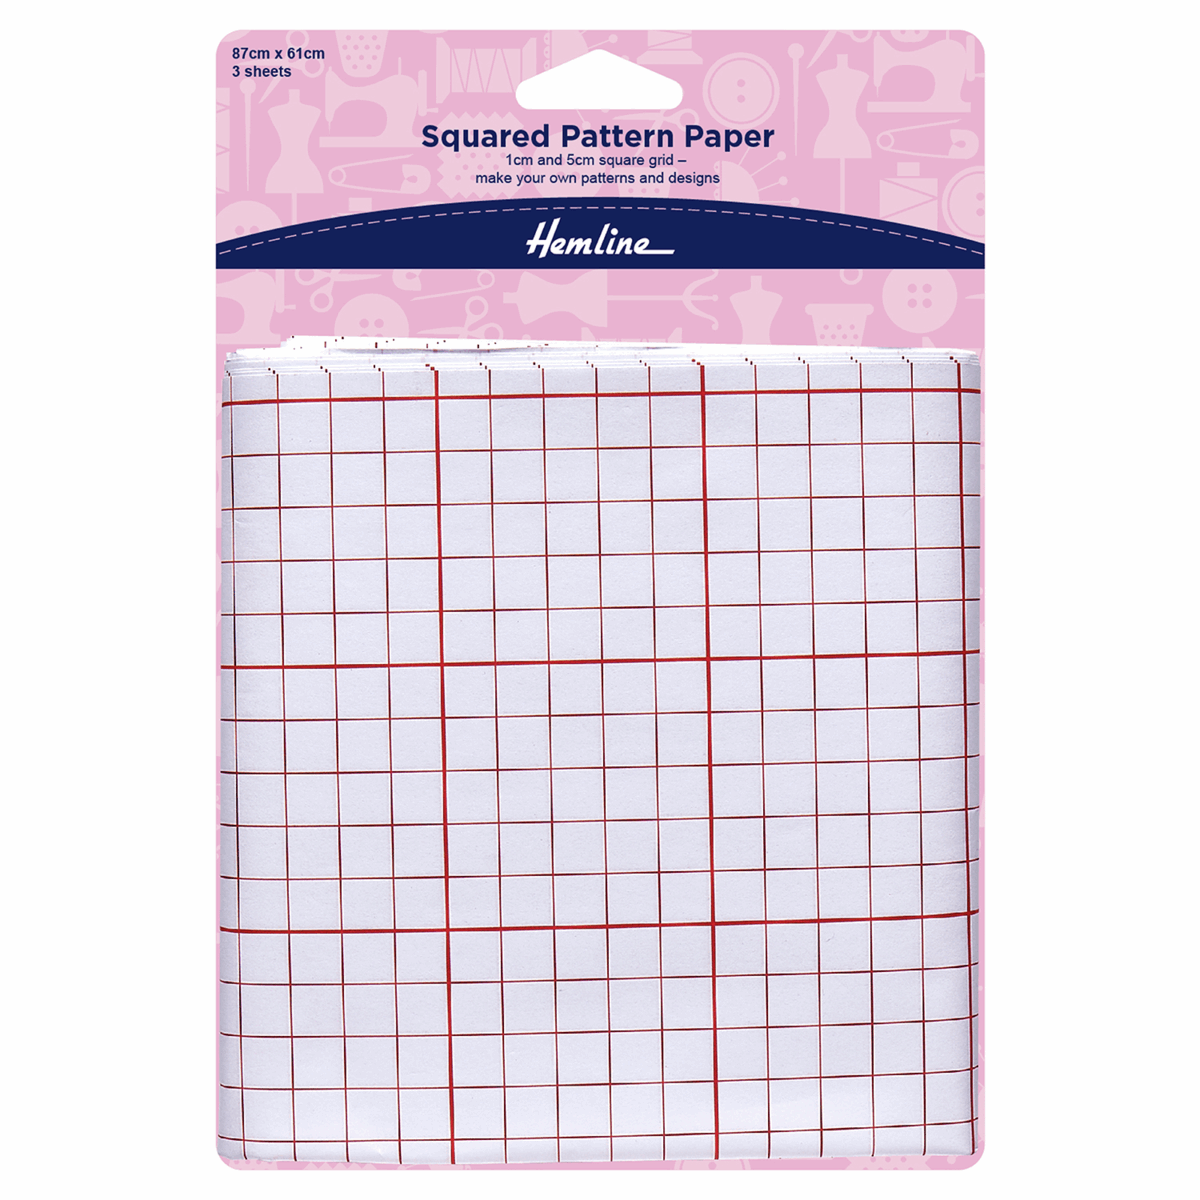 Hemline Square Pattern Tracing Paper - 3 sheets